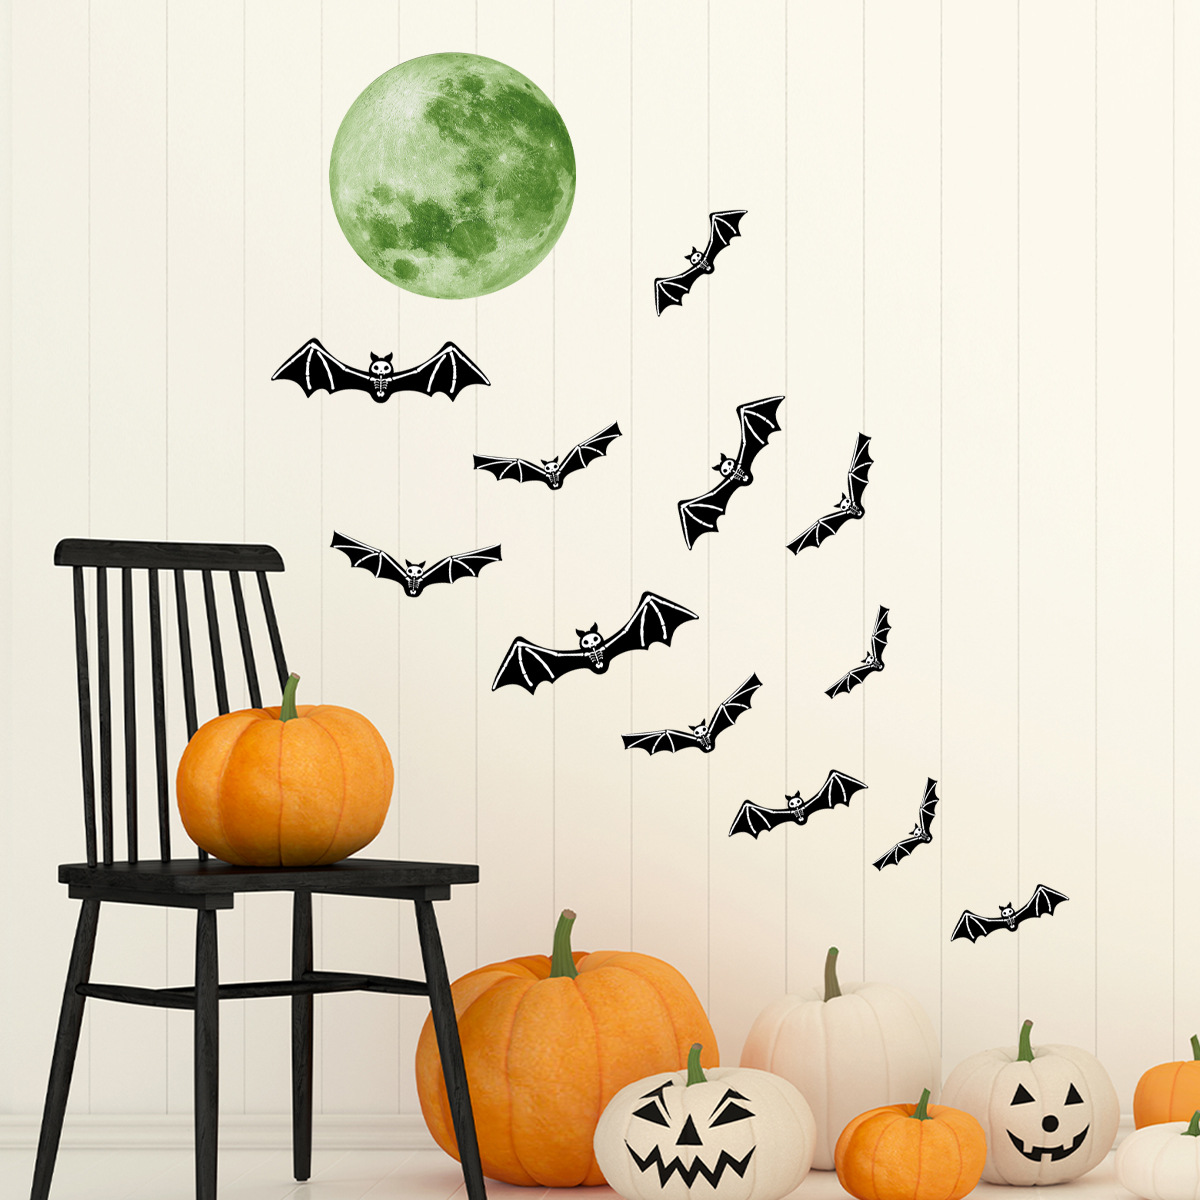 Creating a Haunted House: Tips for Terrifying Decor